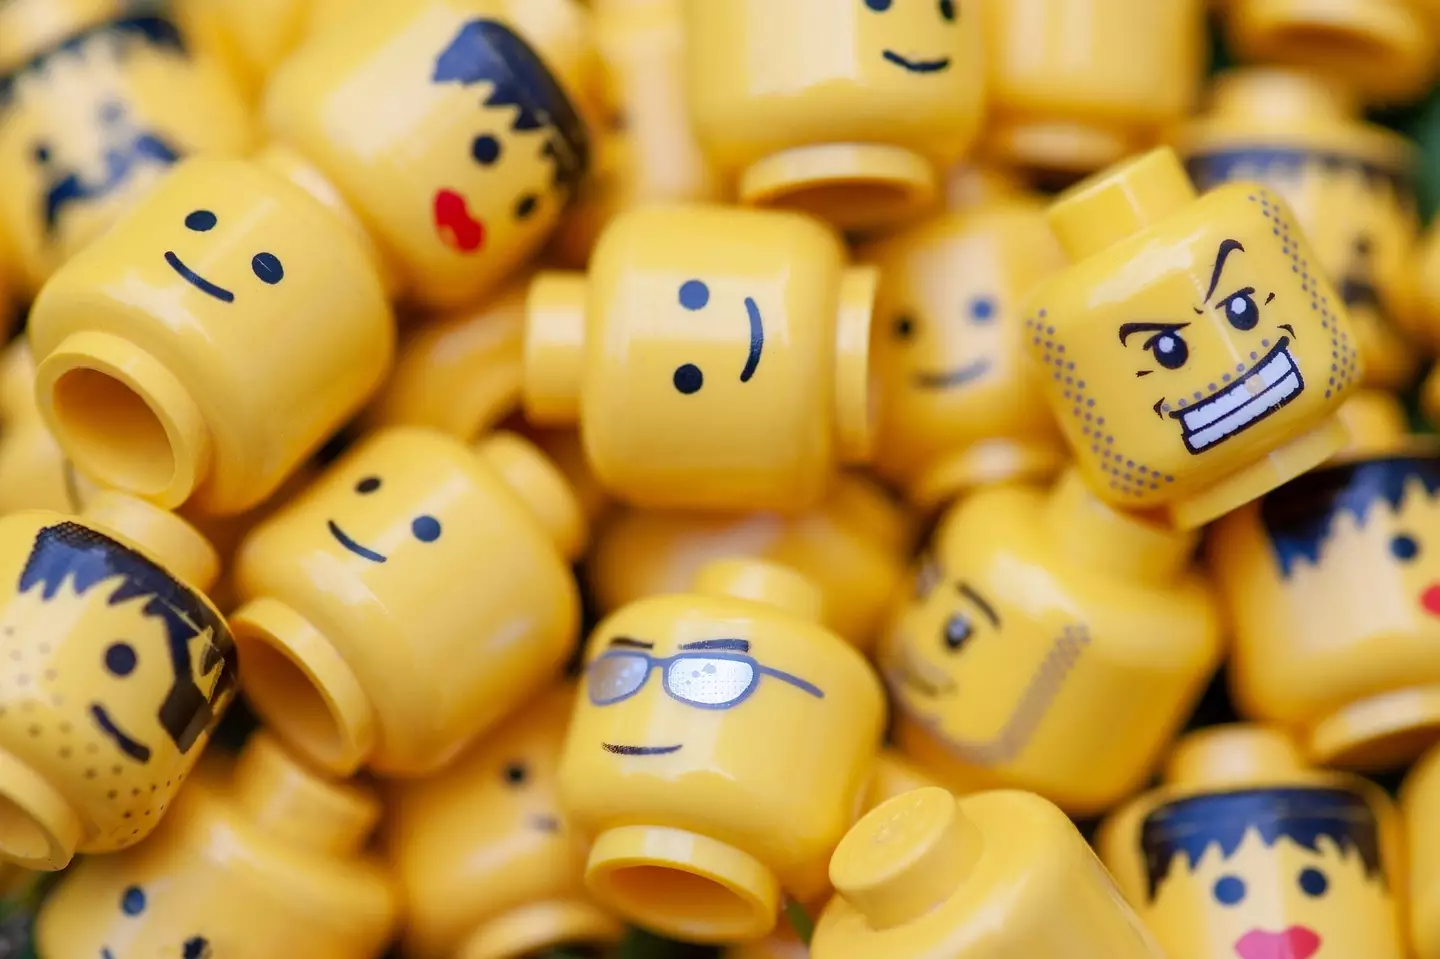 Researchers ate six Lego heads in the name of science.